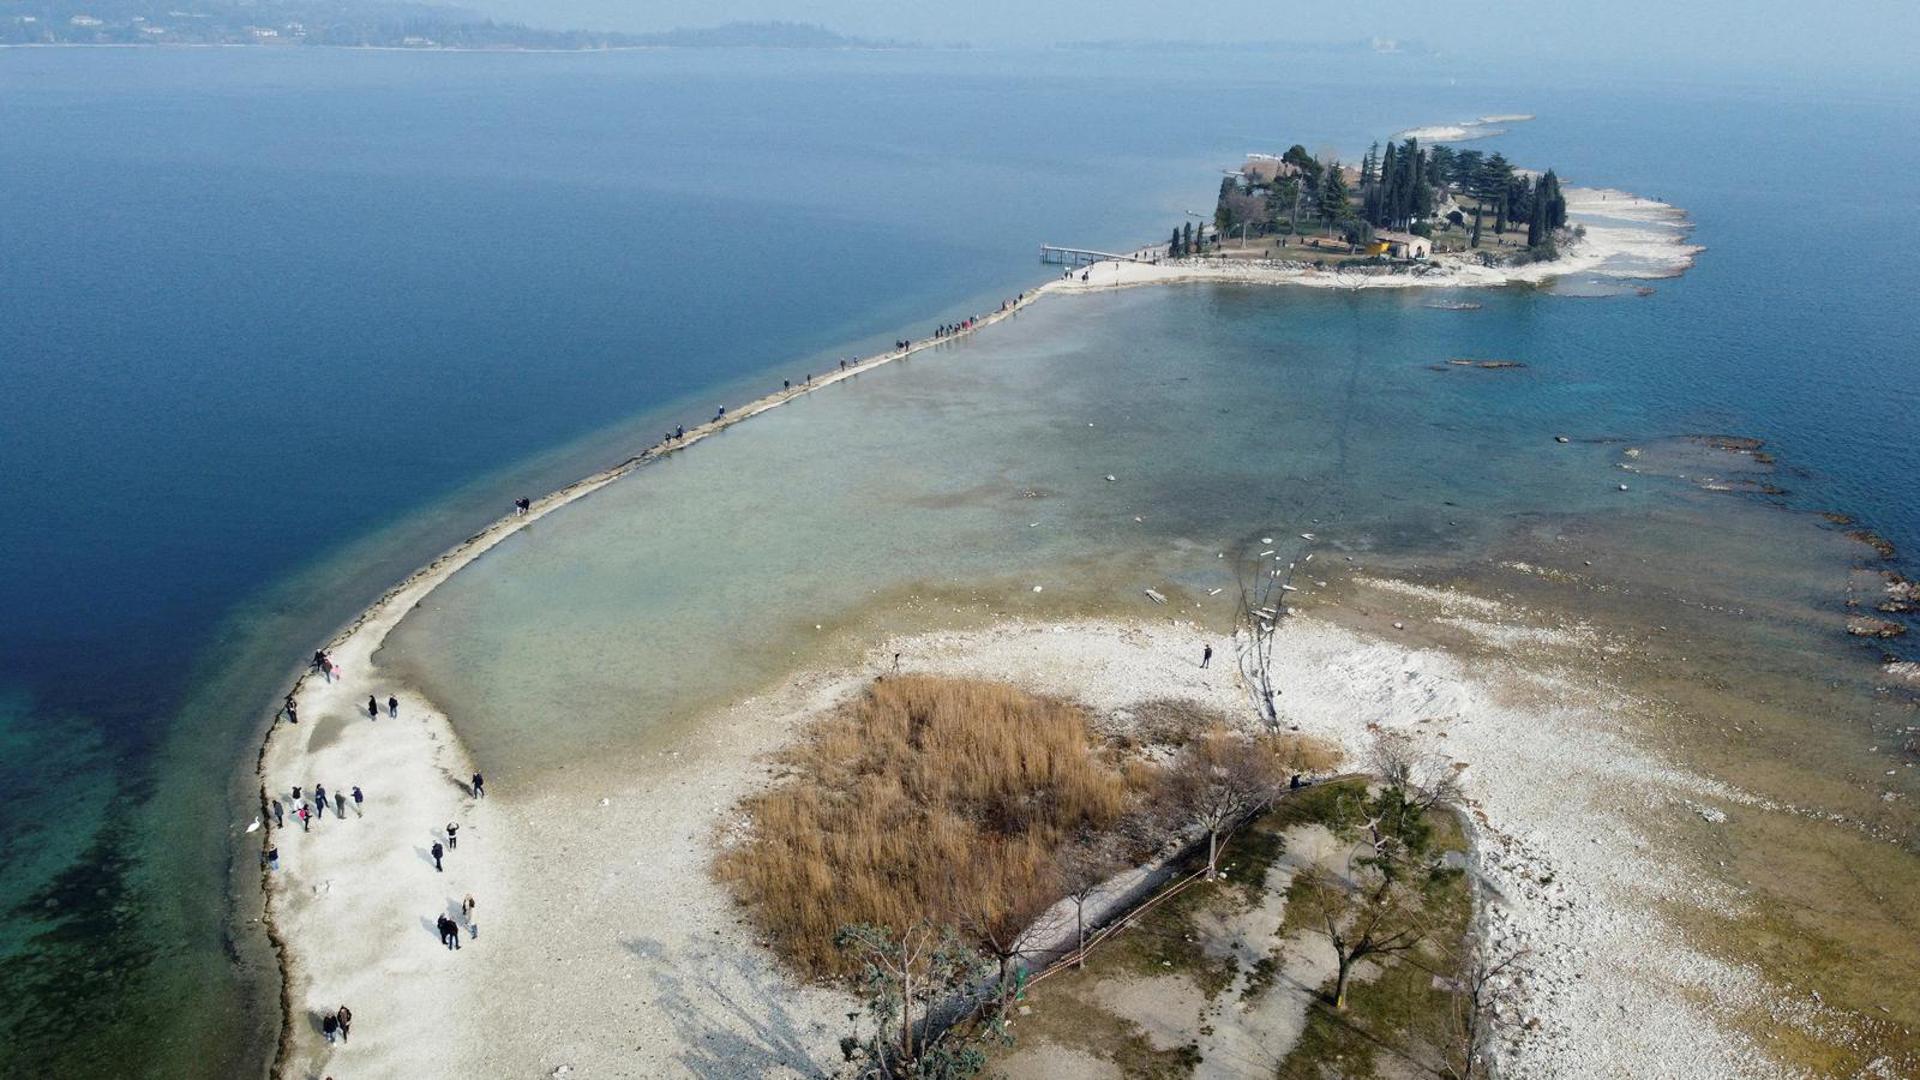 FILE PHOTO: A drone image shows San Biagio island, affected by drought in Lake Garda, near Lido di Manerba, Italy, February 21, 2023. REUTERS/Alex Fraser/File Photo Photo: ALEX FRASER/REUTERS